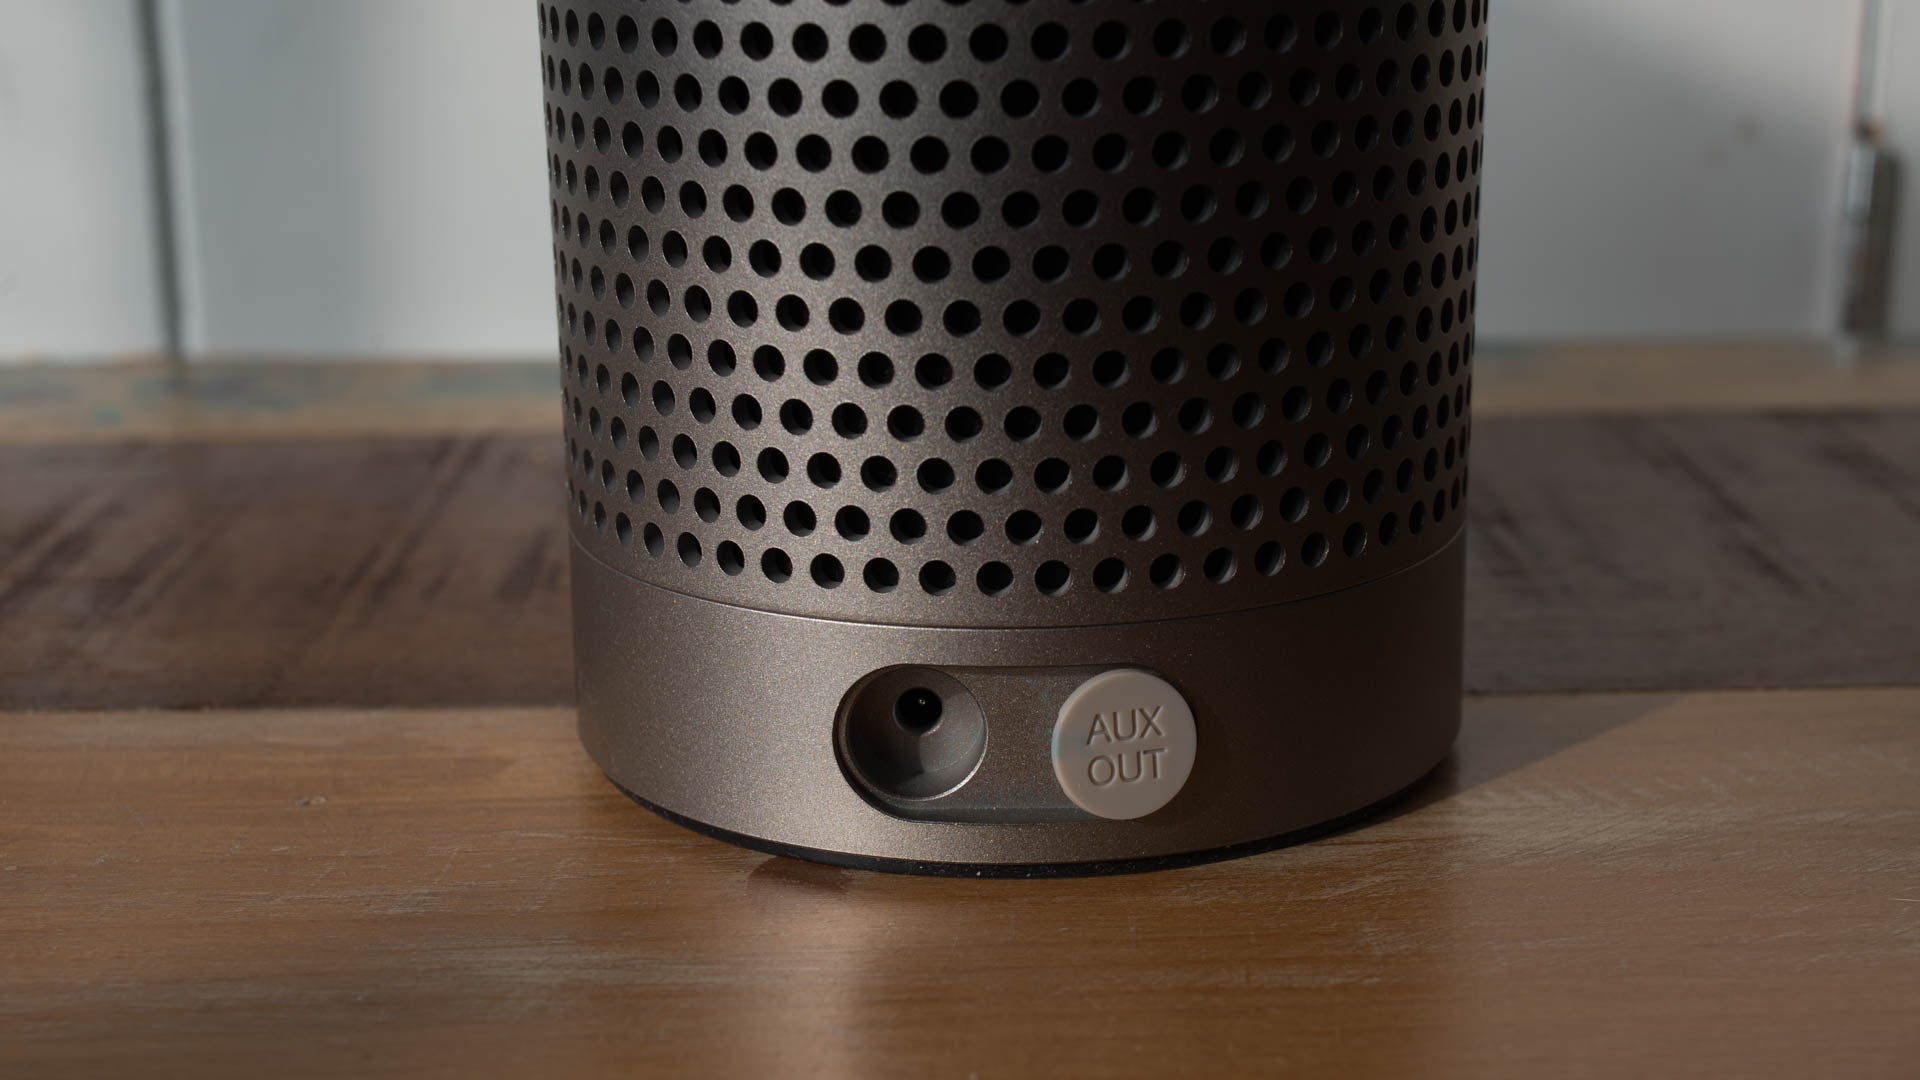 Close-up of Amazon Echo Plus with AUX output.